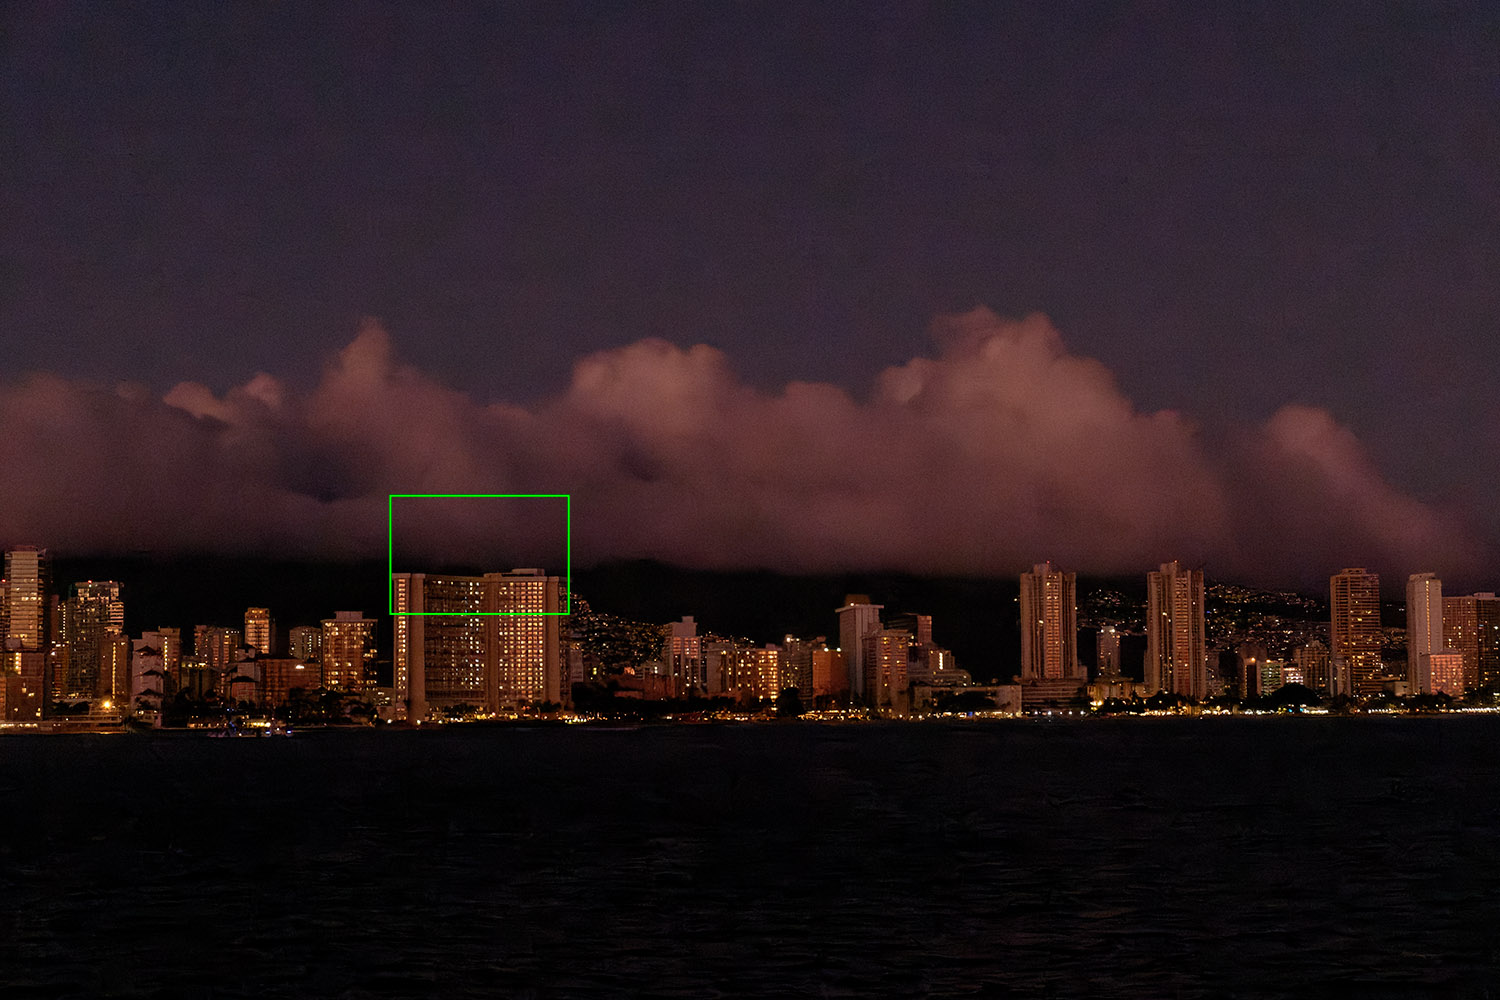 Skyline, Honolulu, October 2021, ISO 51200 – 1/105 – ƒ/7.1 – 59mm – Exp. -⅔. (Click to download the raw file)